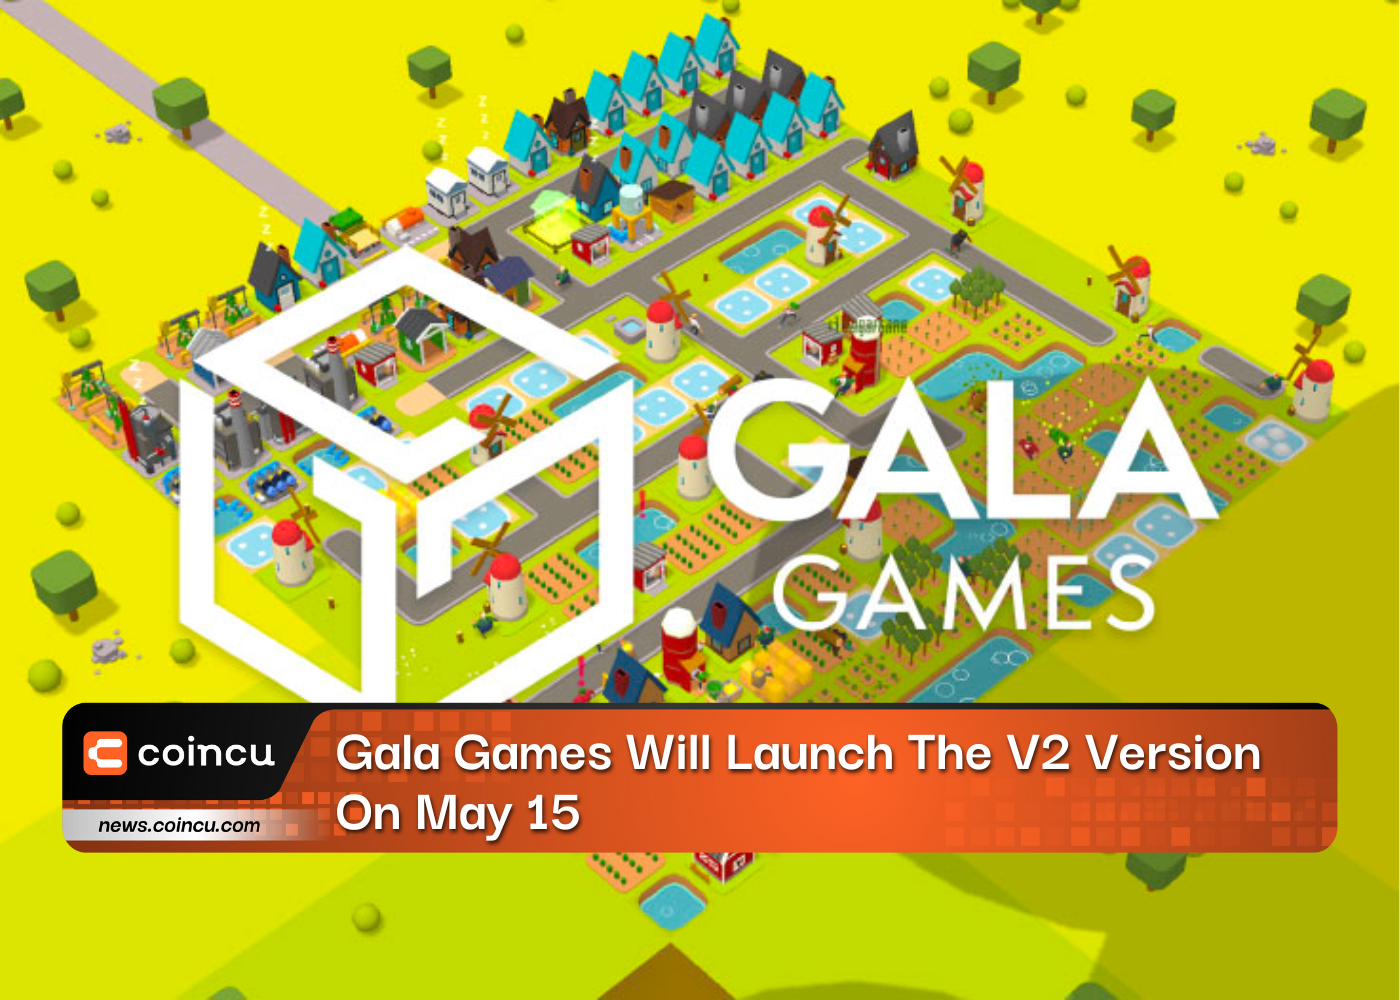 Gala Games Will Launch The V2 Version On May 15